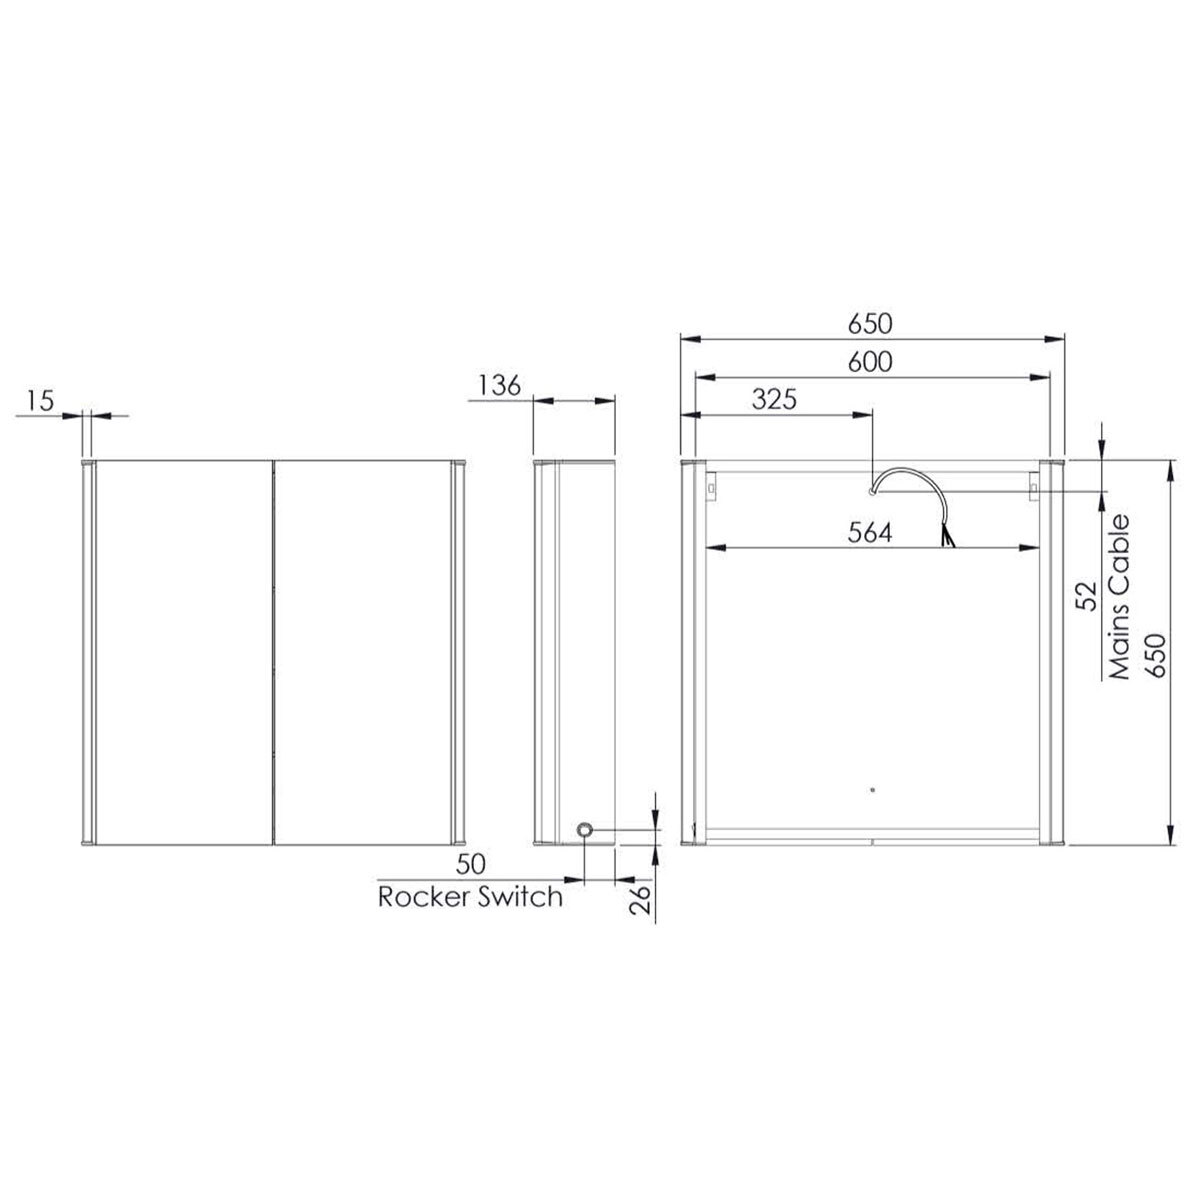 Line drawing of cabinet on white background with dimensions